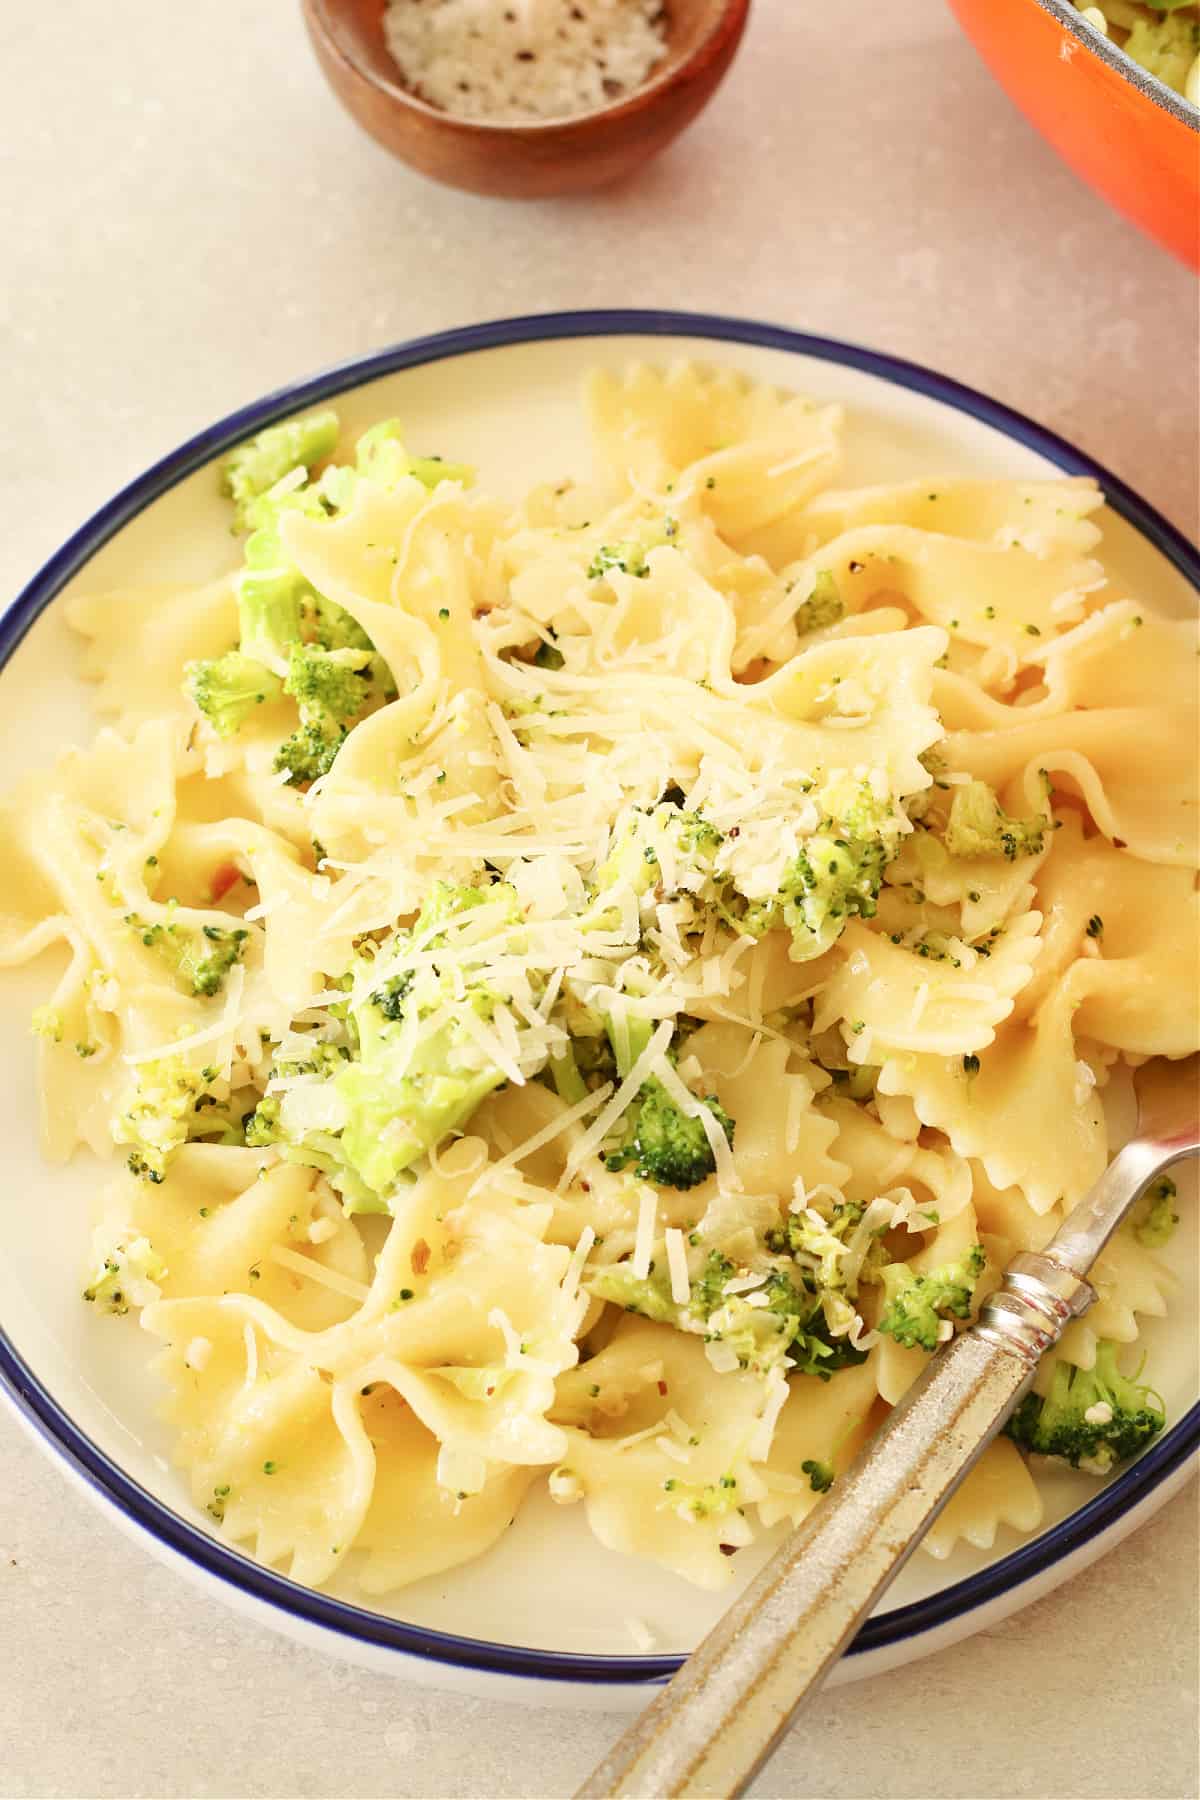 Bow tie pasta and broccoli on a plate with blue rim.